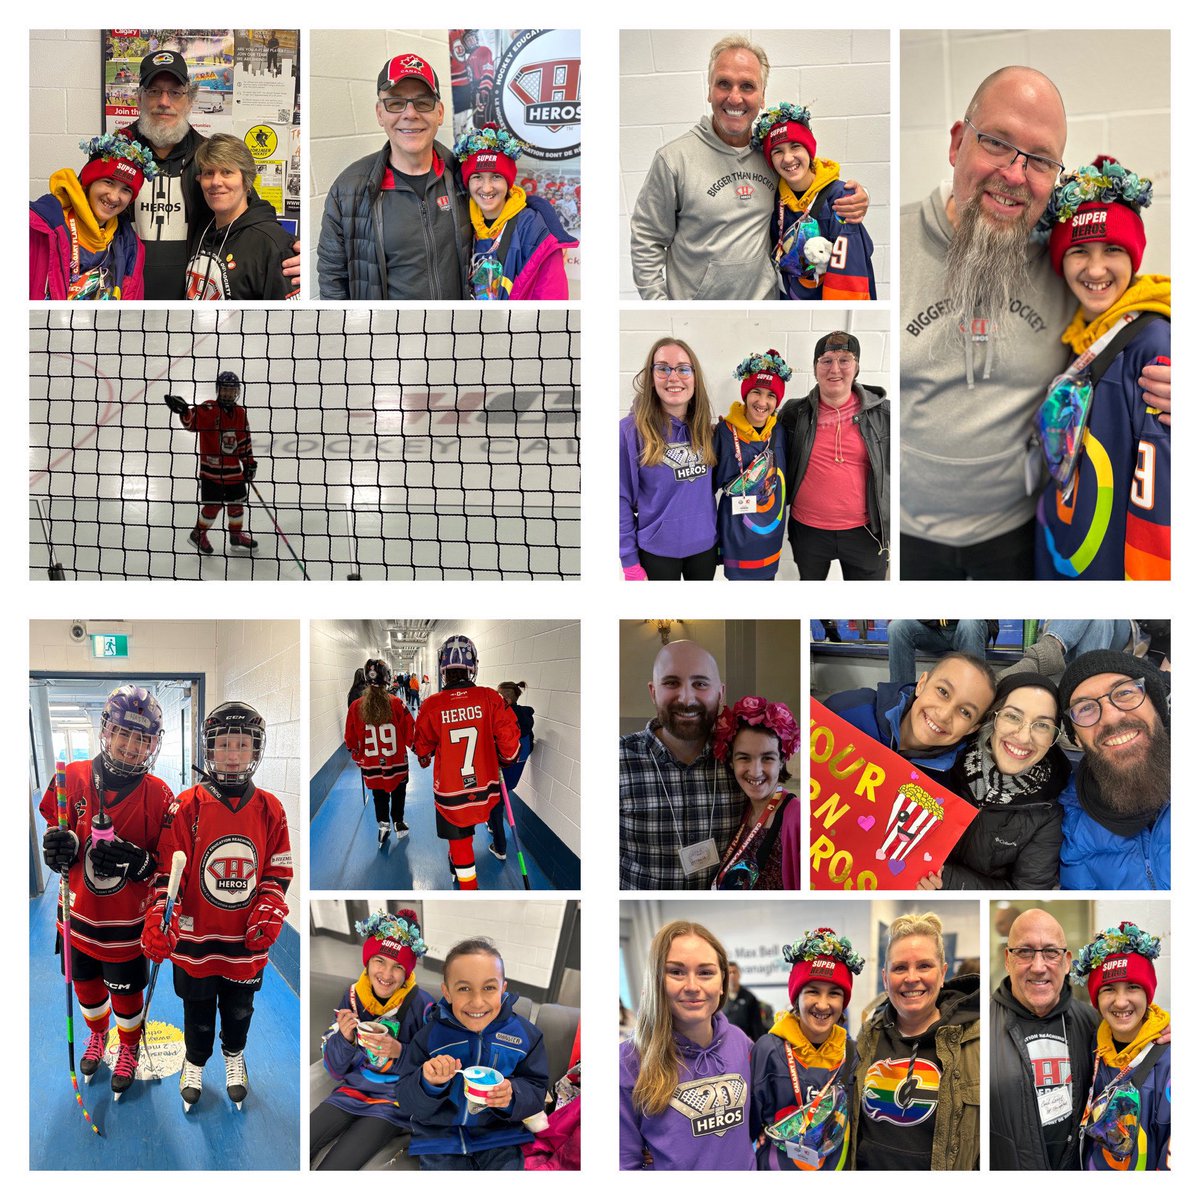 Thank you to all the amazing volunteers, coaches & people who helped put this event together & for giving our girl an opportunity we never thought she’d have to be a part of this incredible event. It was life altering in the best way possible #BiggerThanHockey